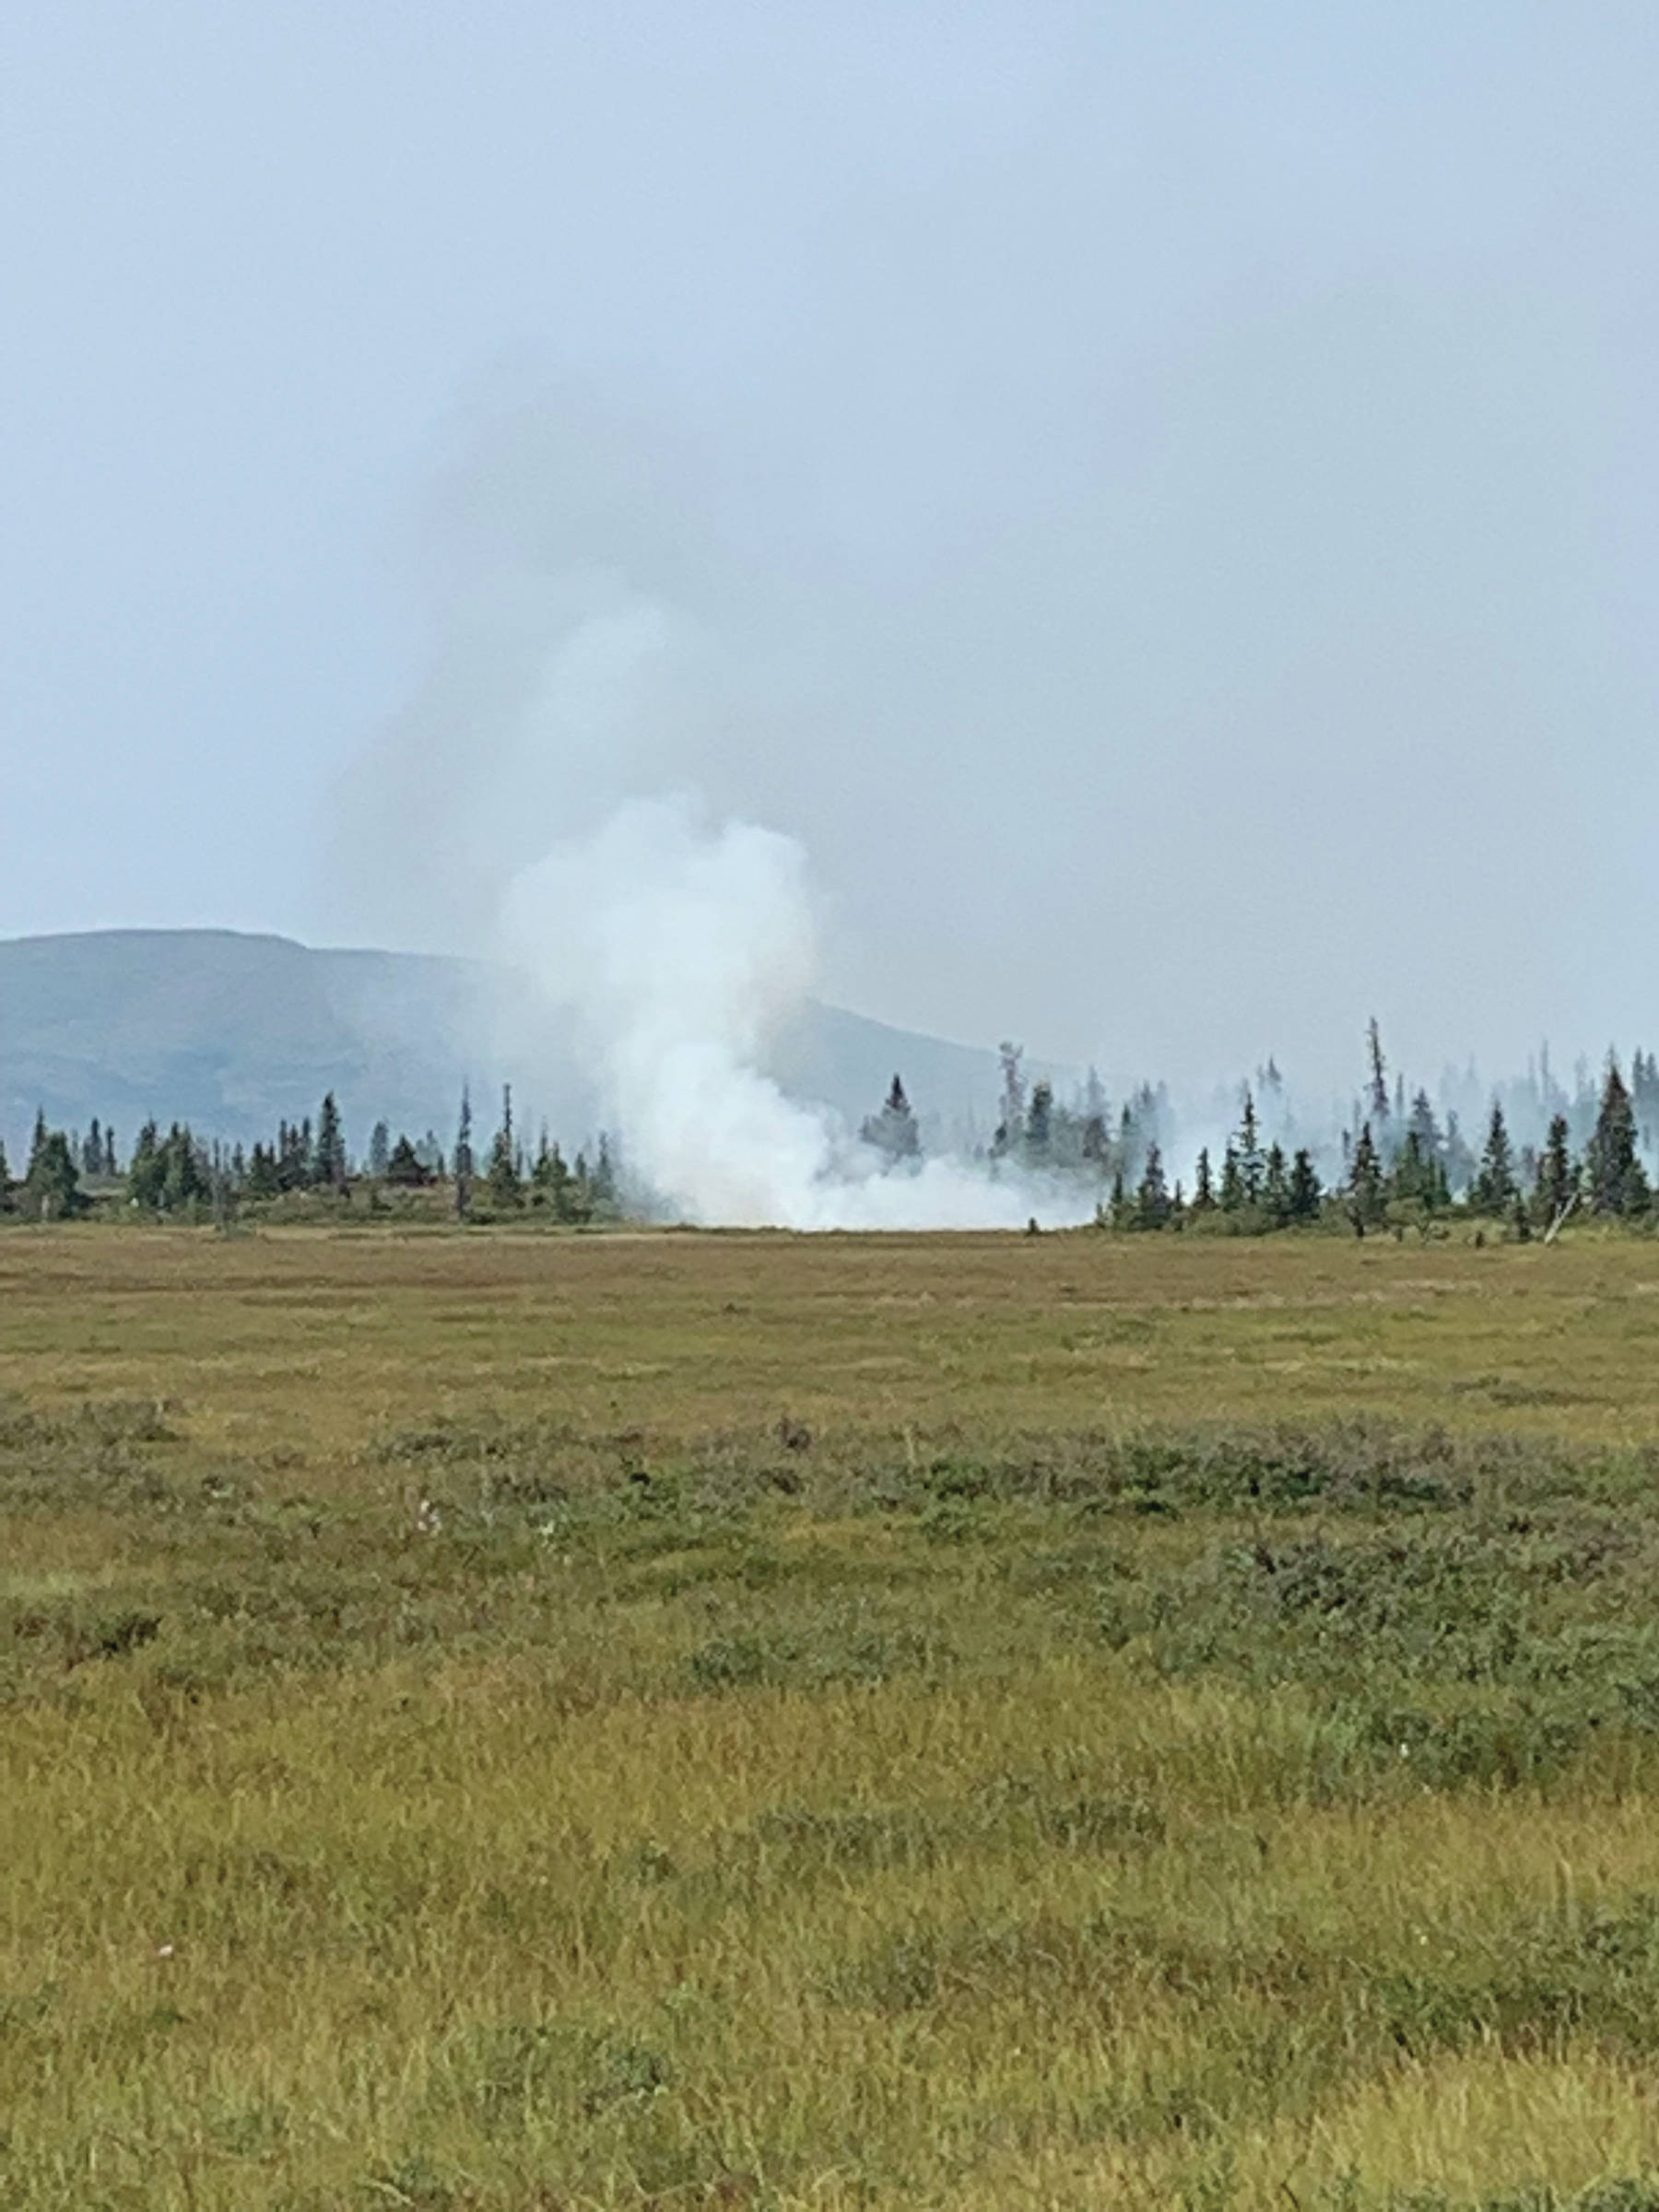 This photo of the Caribou Lake fire was taken about 2:30 p.m. Monday, Aug. 19, 2019, northeast of Homer, Alaska, whenr Ian Pitzman texted a message reporting the fire to his wife, Stephanie Pitzman, via an inReach satellite communication device. (Photo by Ian Pitzman)